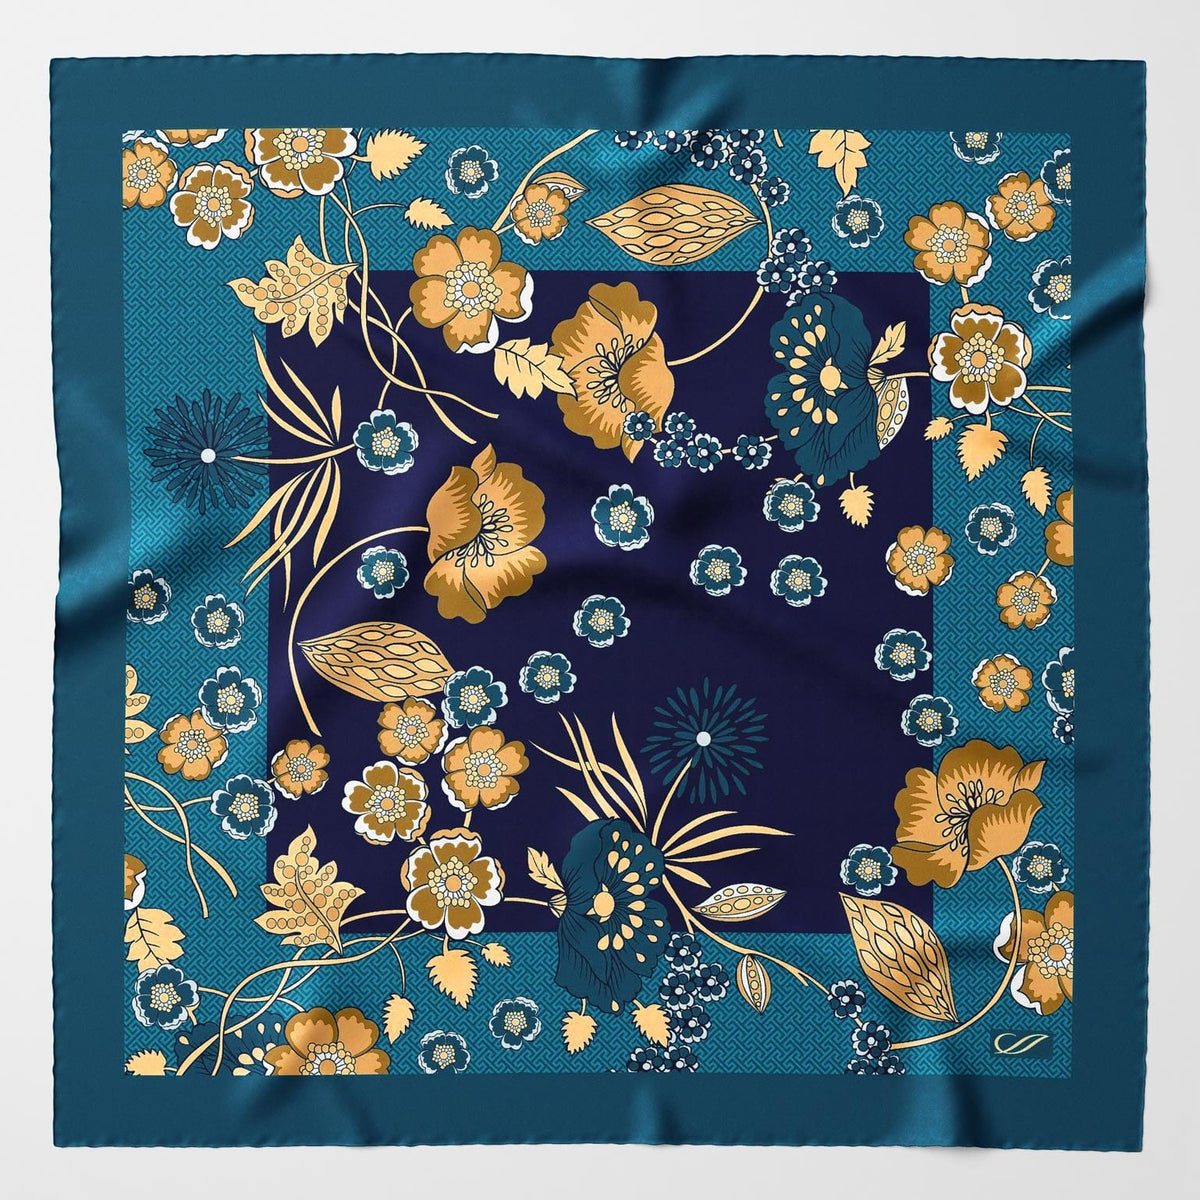 Teal Silk Scarf - Floral Print Made in Italy